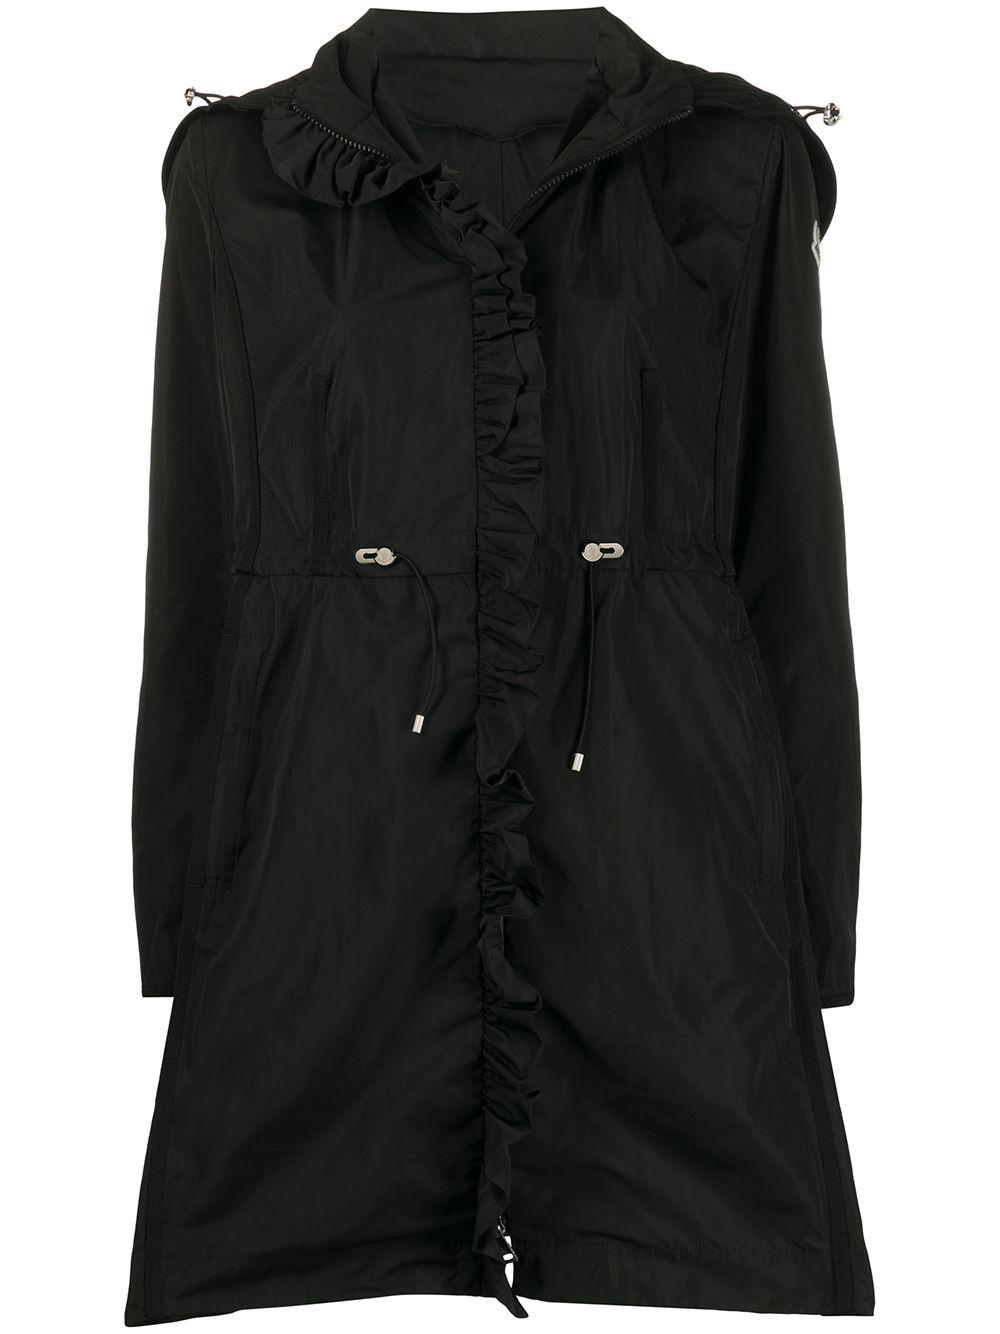 Moncler Outremer Ruffle Coat in Black | Lyst Canada